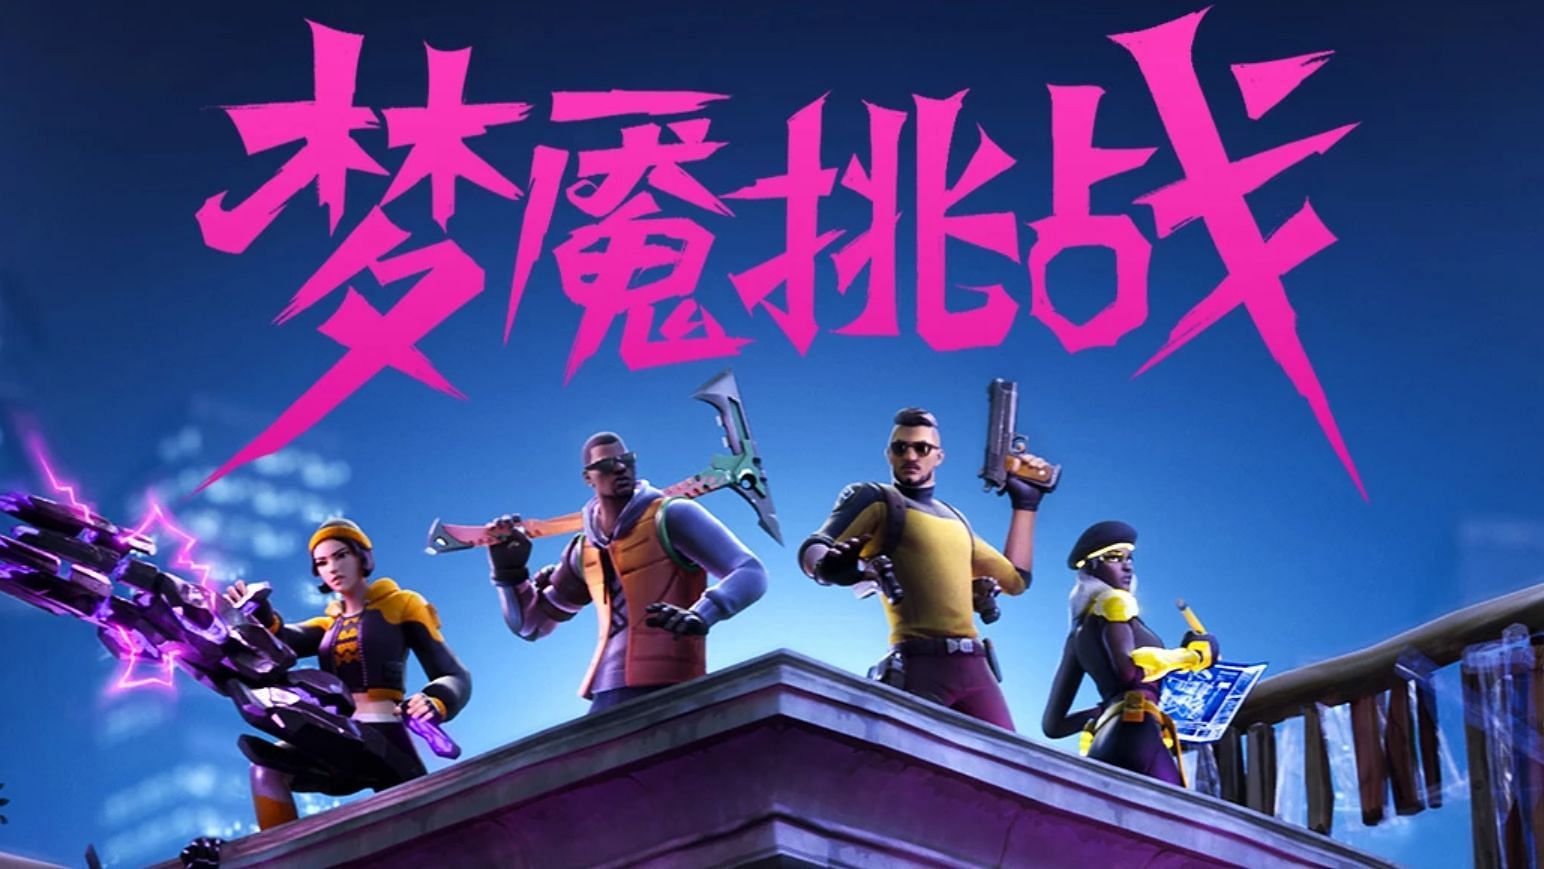 Why to Fortnite China has no microtransactions? (Image via Epic Games)